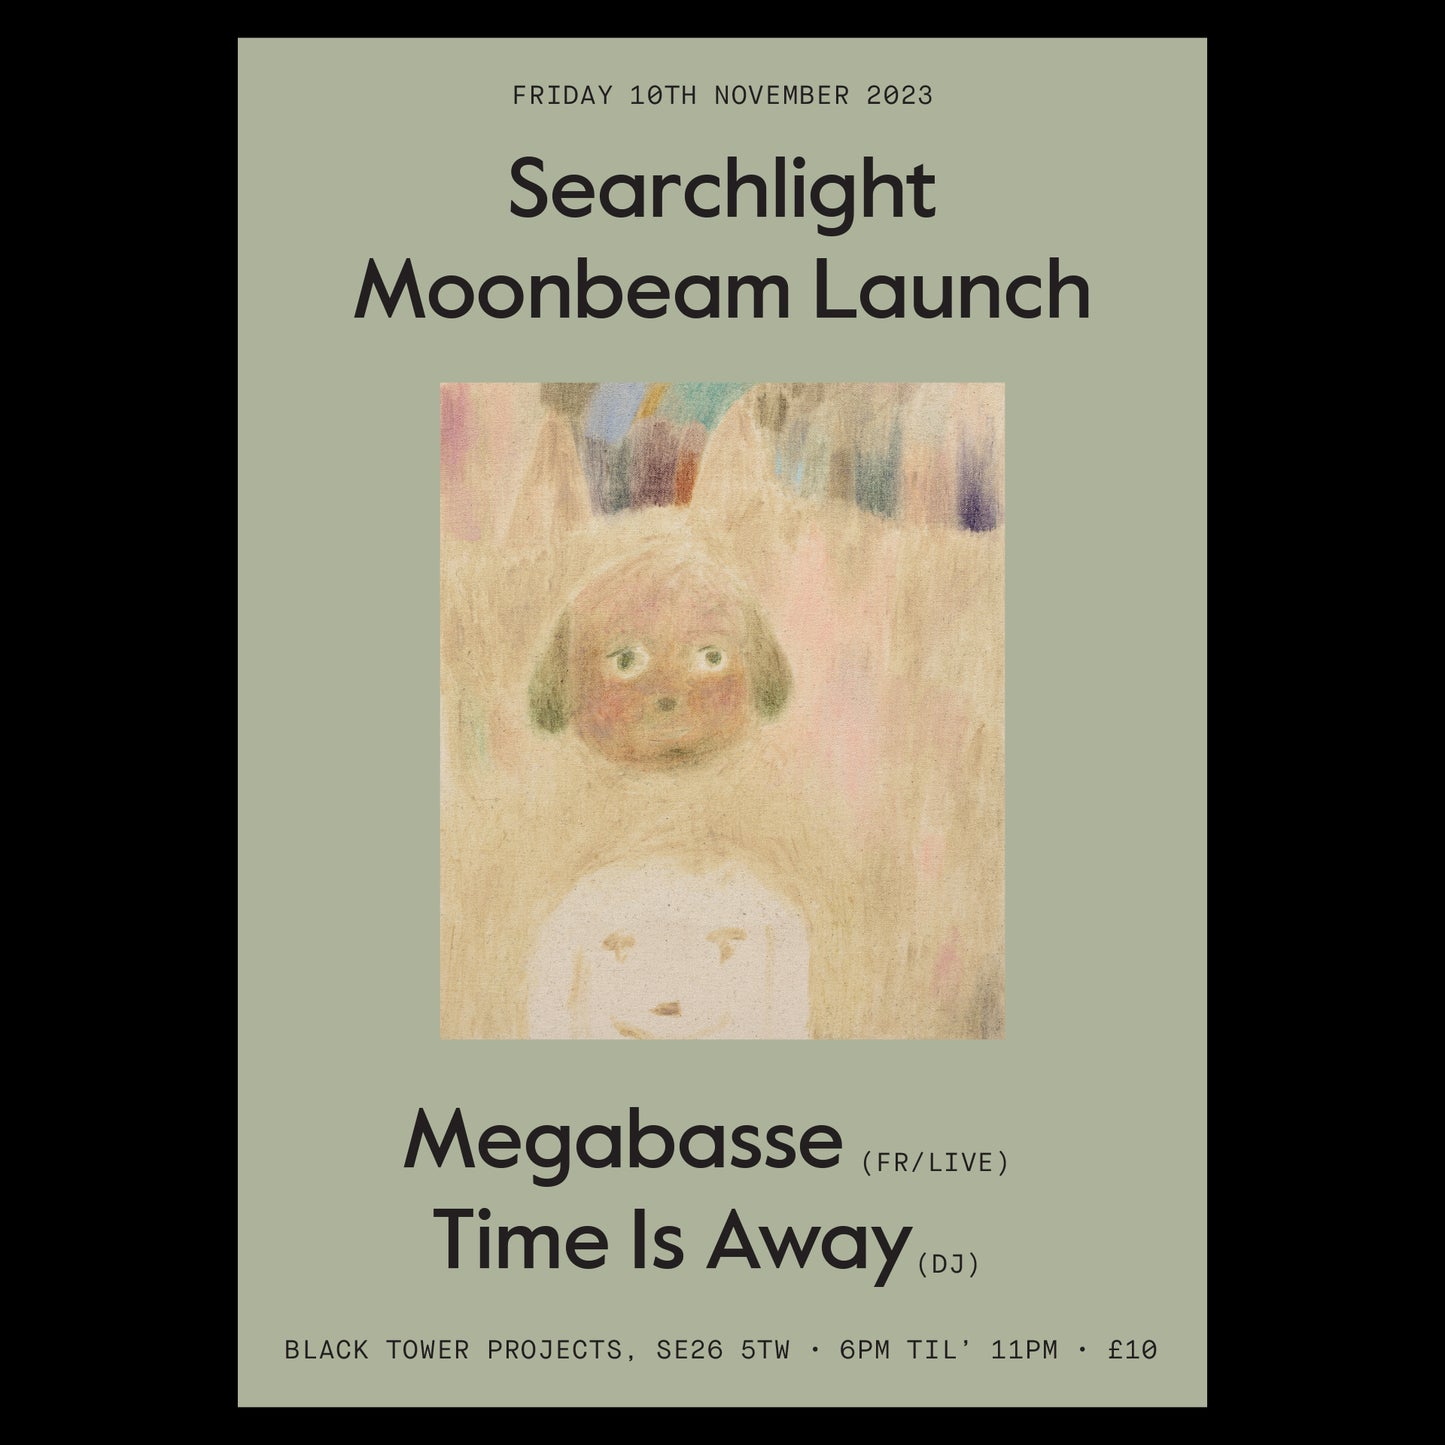 Searchlight Moonbeam LP launch with Time Is Away & Megabasse (live)